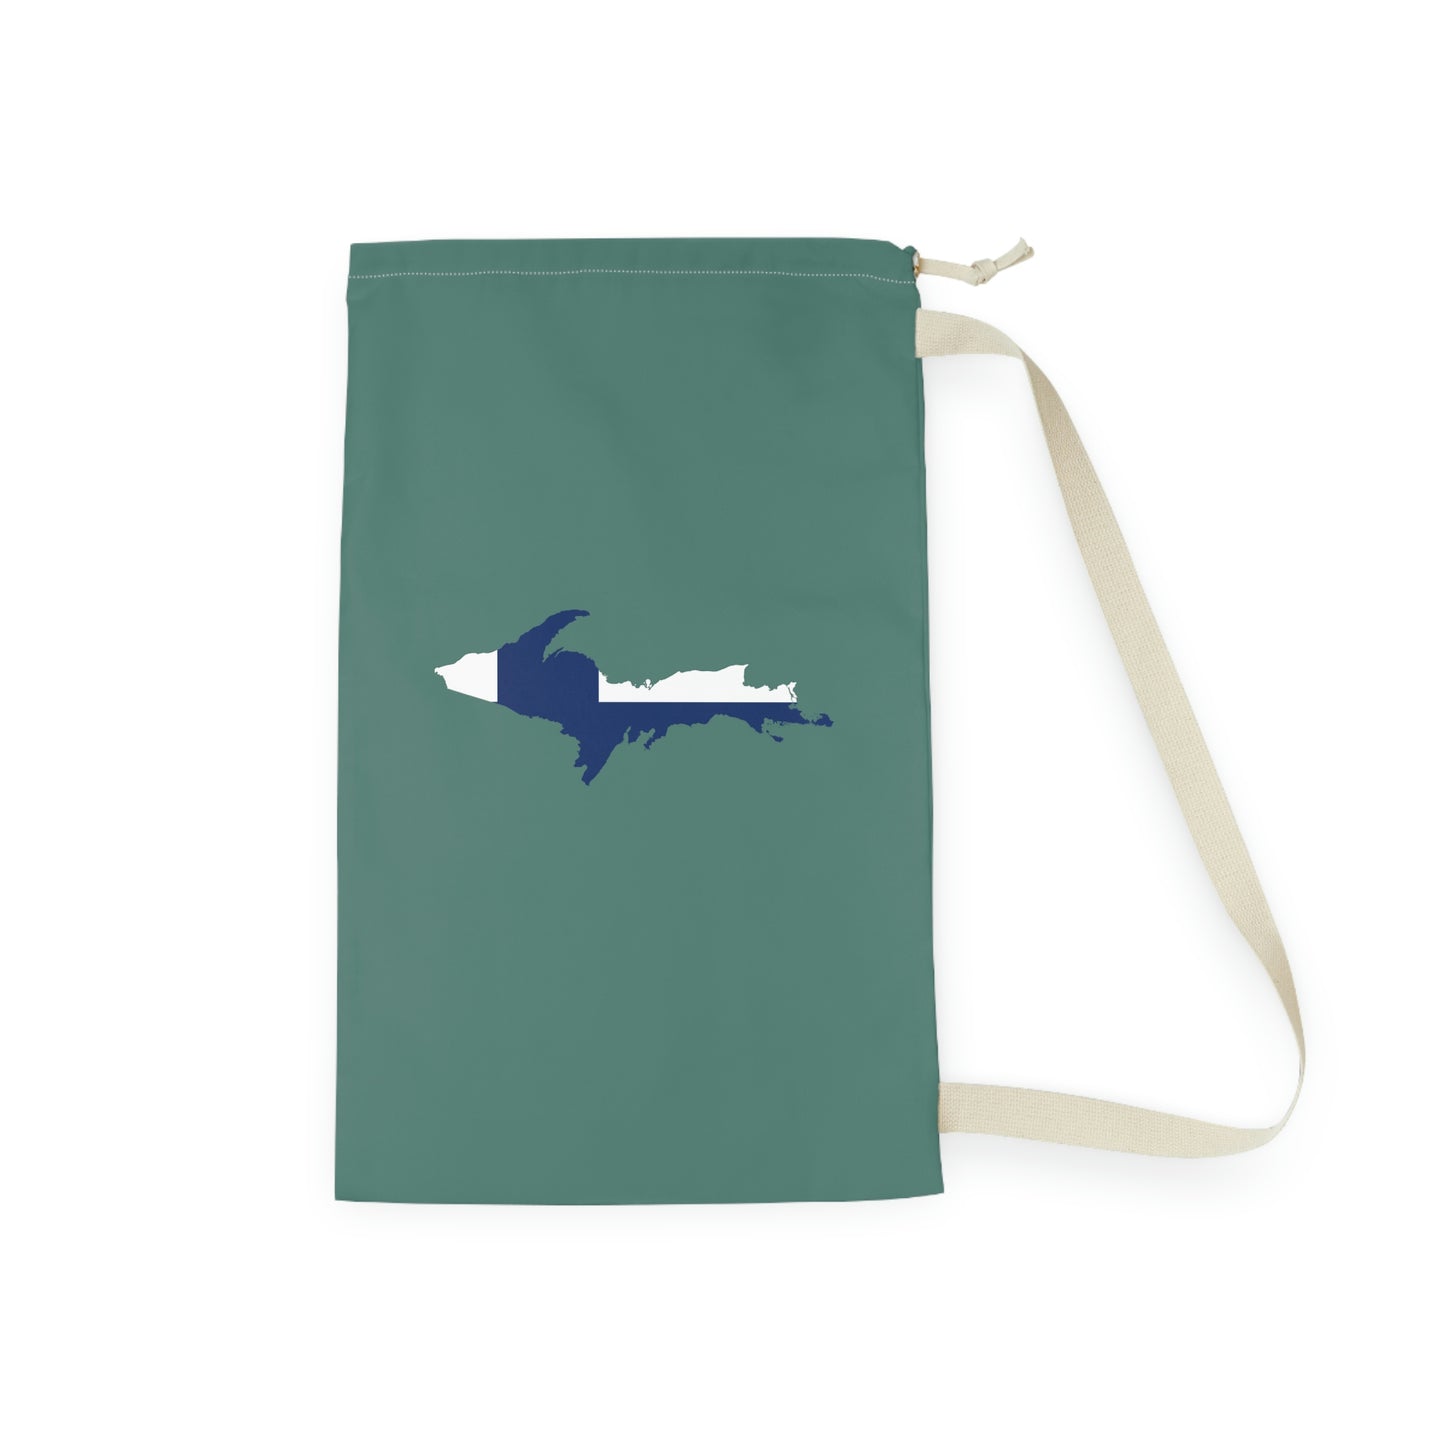 Michigan Upper Peninsula Laundry Bag (Copper Green w/ UP Finland Flag Outline)